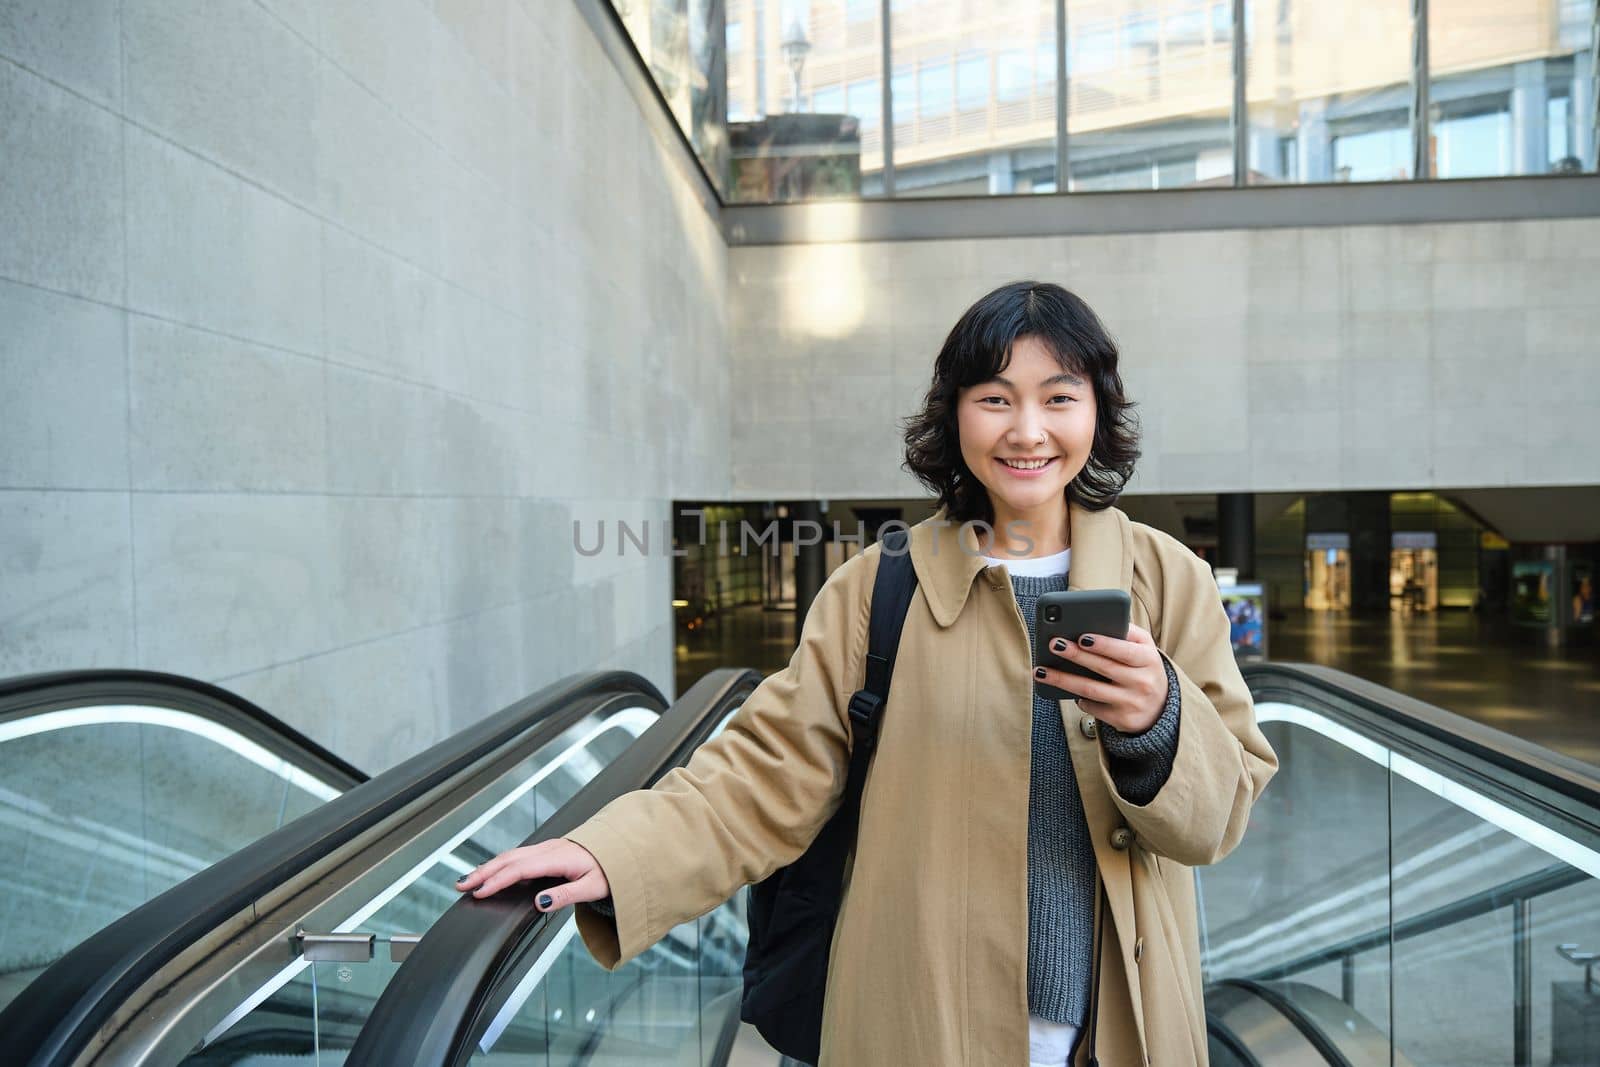 Technology and people concept. Smiling brunette woman travels around city, holds smartphone and laughs, uses mobile phone on her way home, stands on escalator.